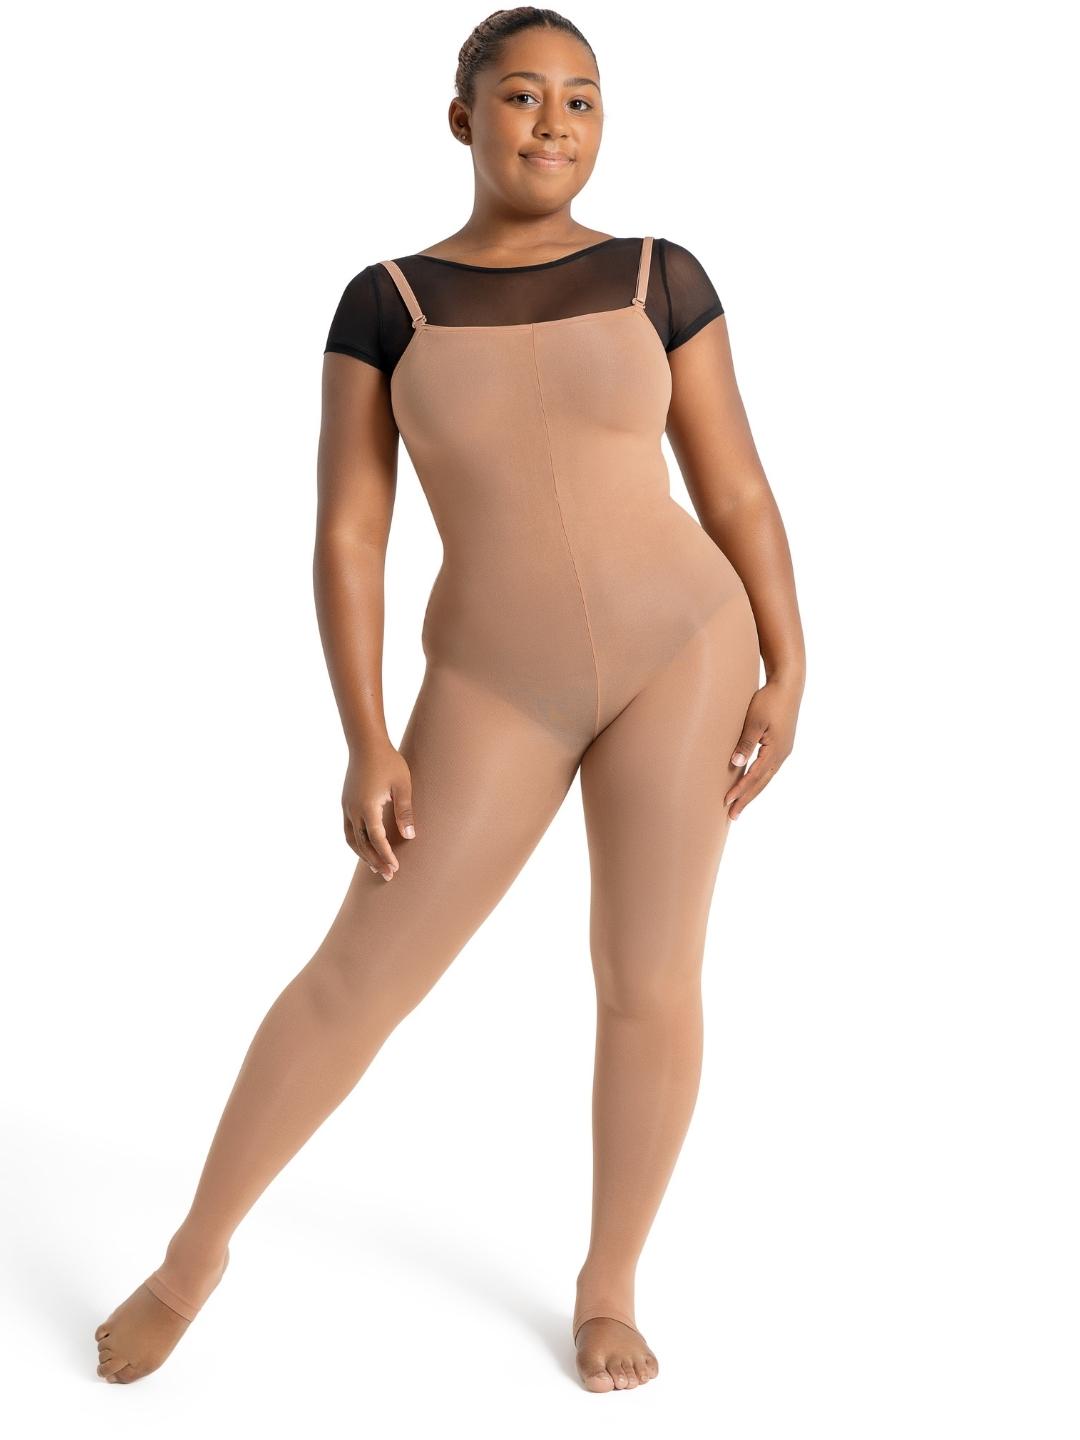 Dance Body Tights, Woman Body Tights For Dance